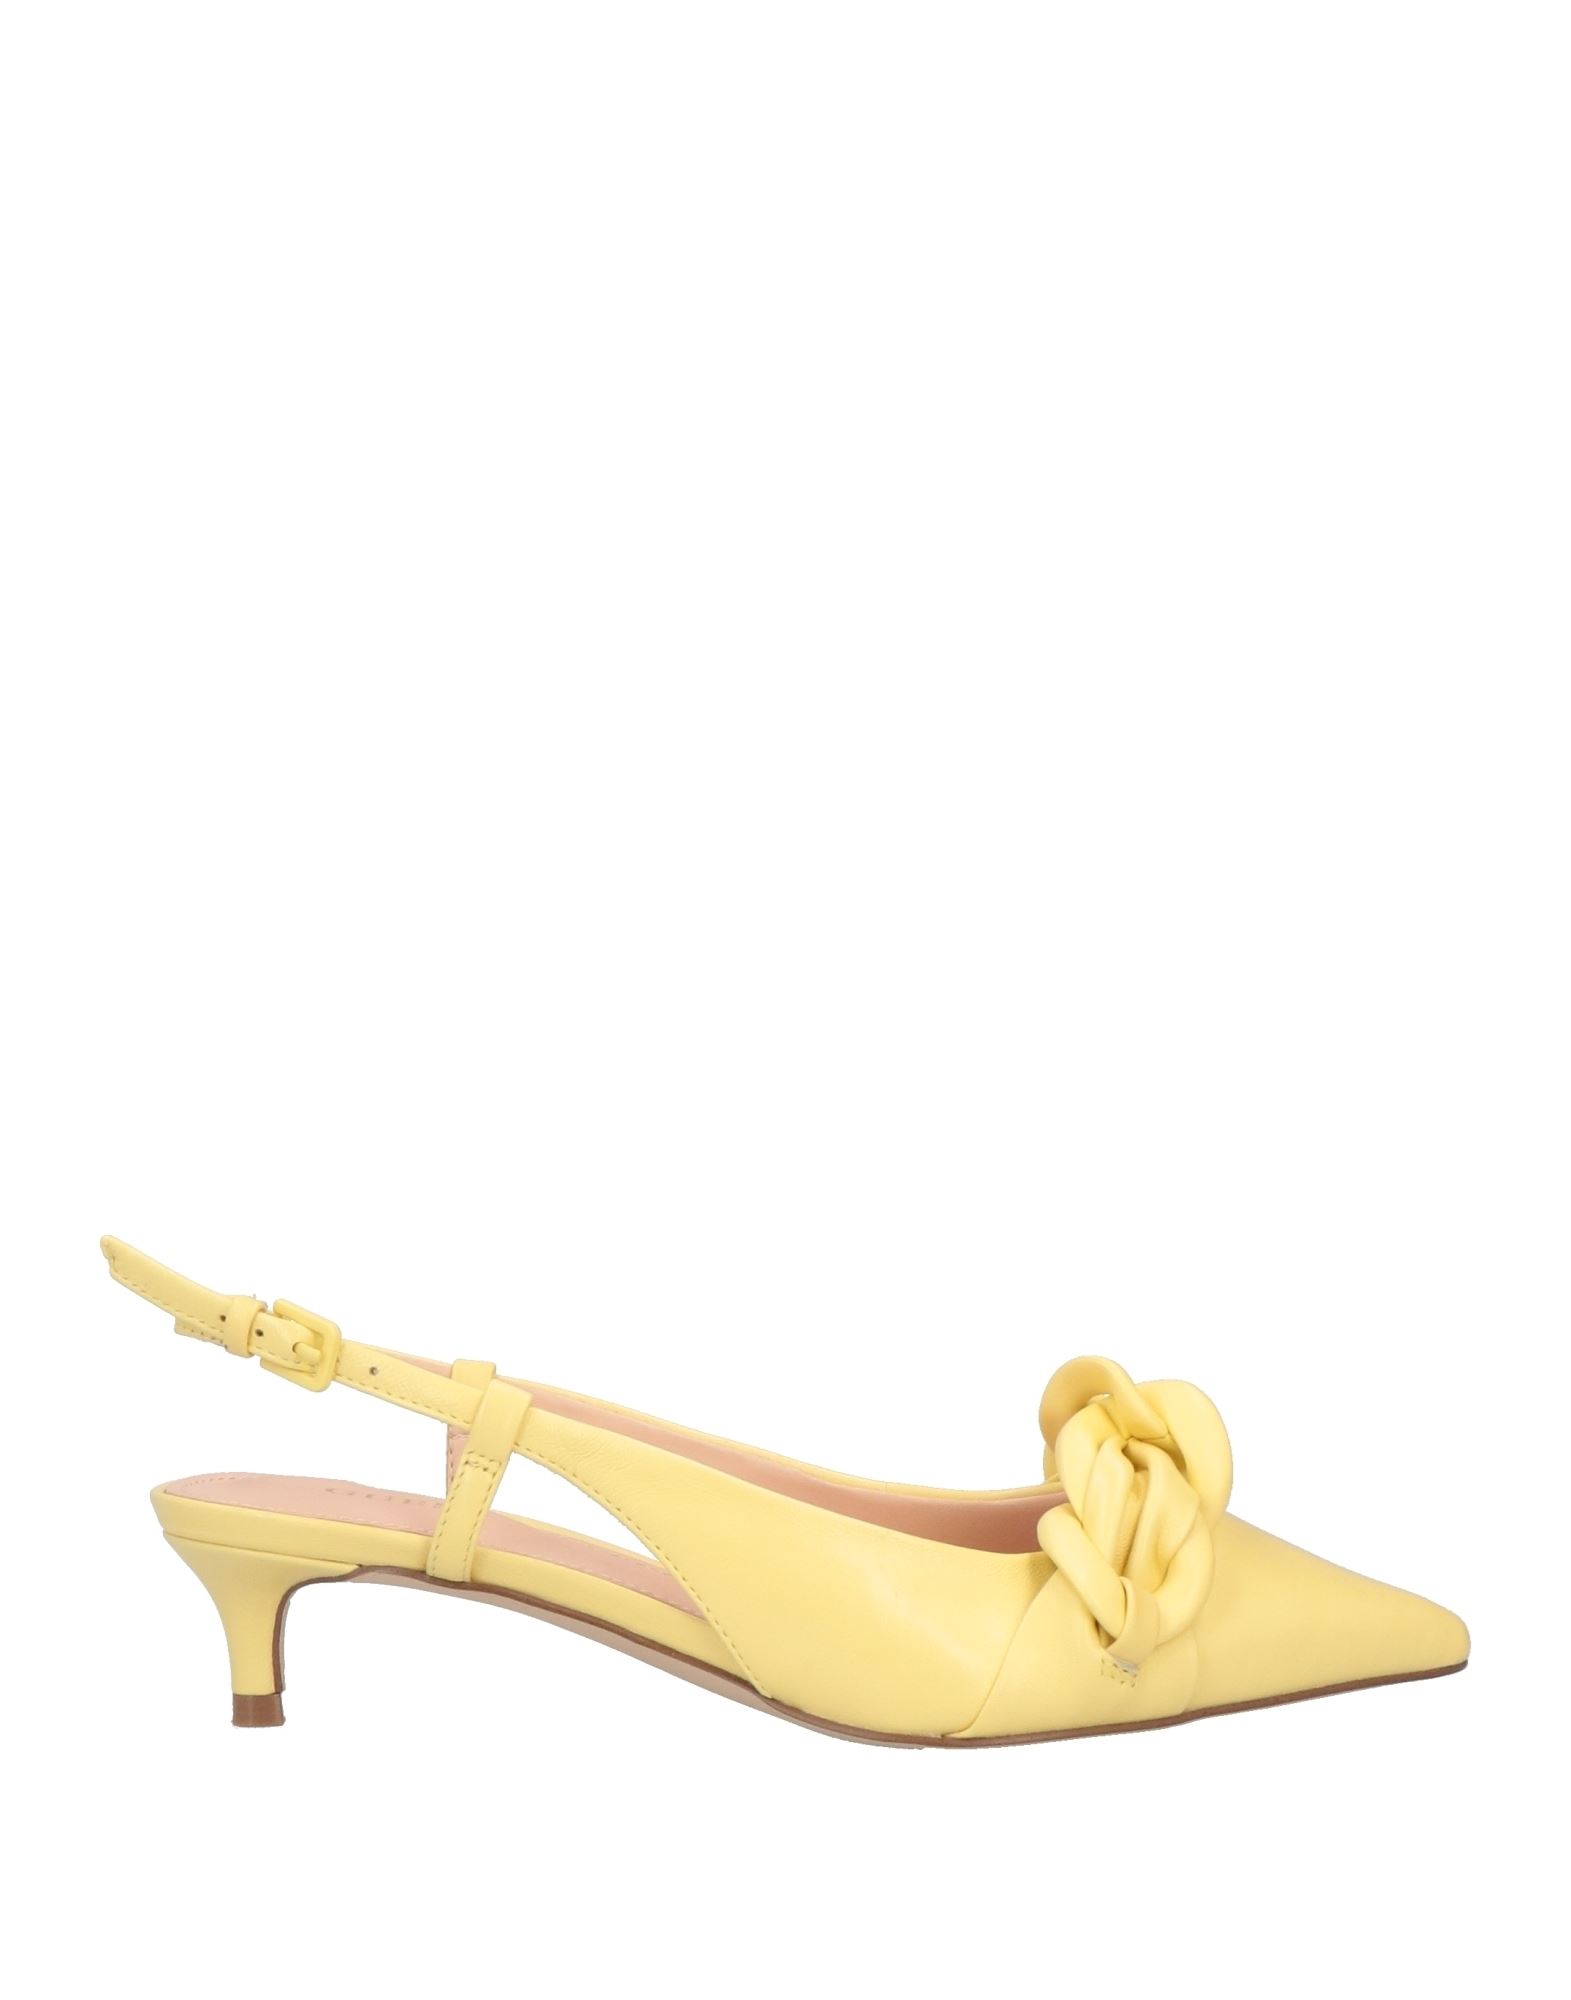 Guess Pumps In Yellow